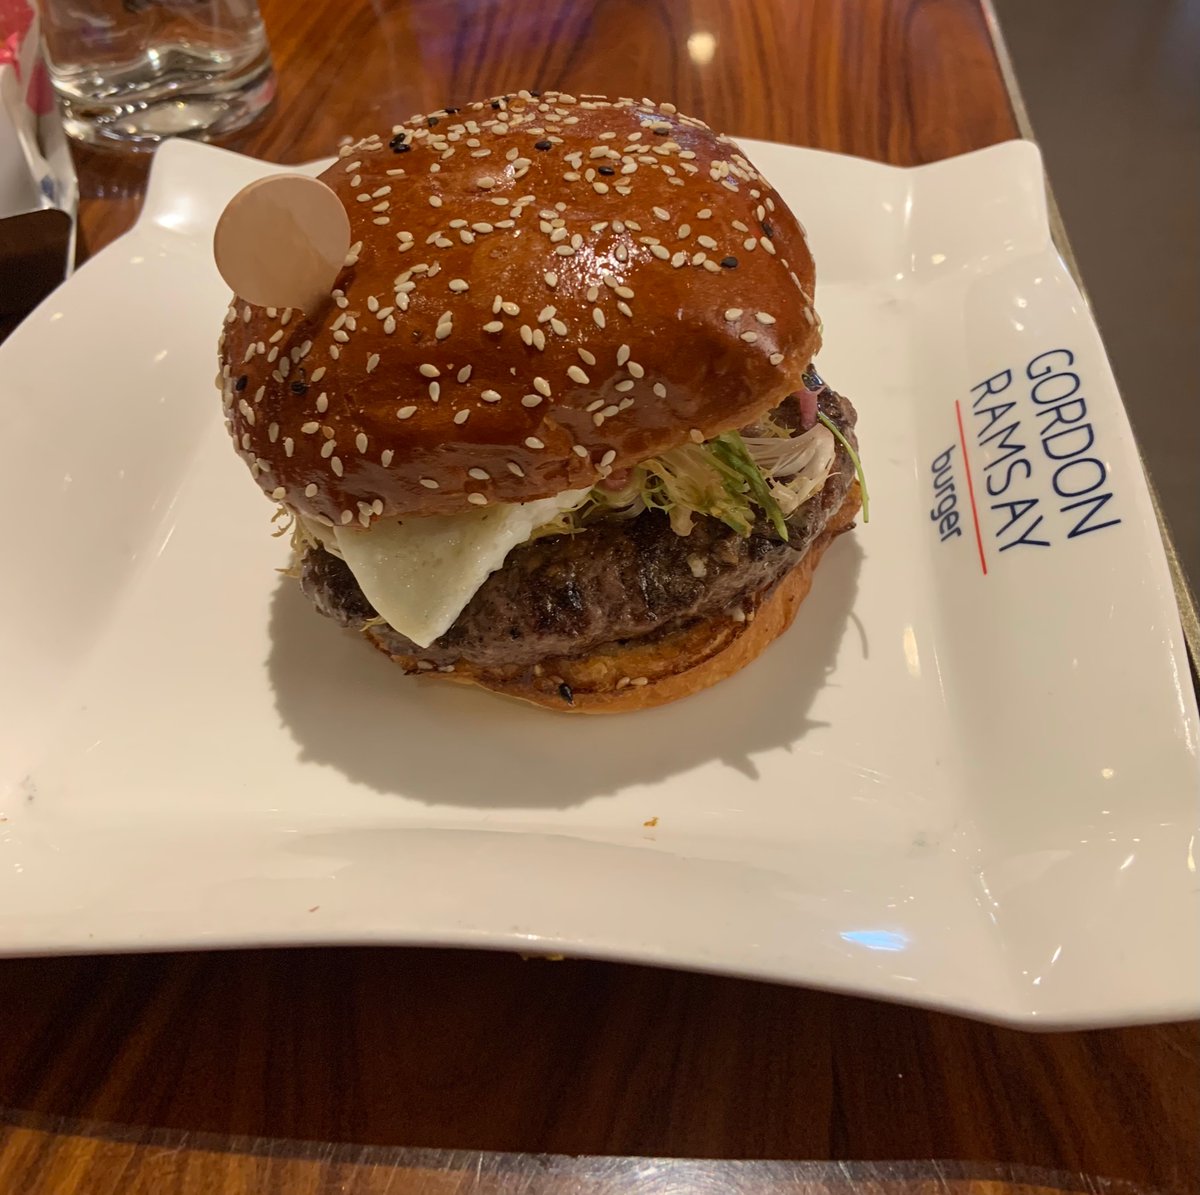 The truffle burger at Gordon Ramsay Burger in Vegas is certainly recommended! https://t.co/0owzRyjtil